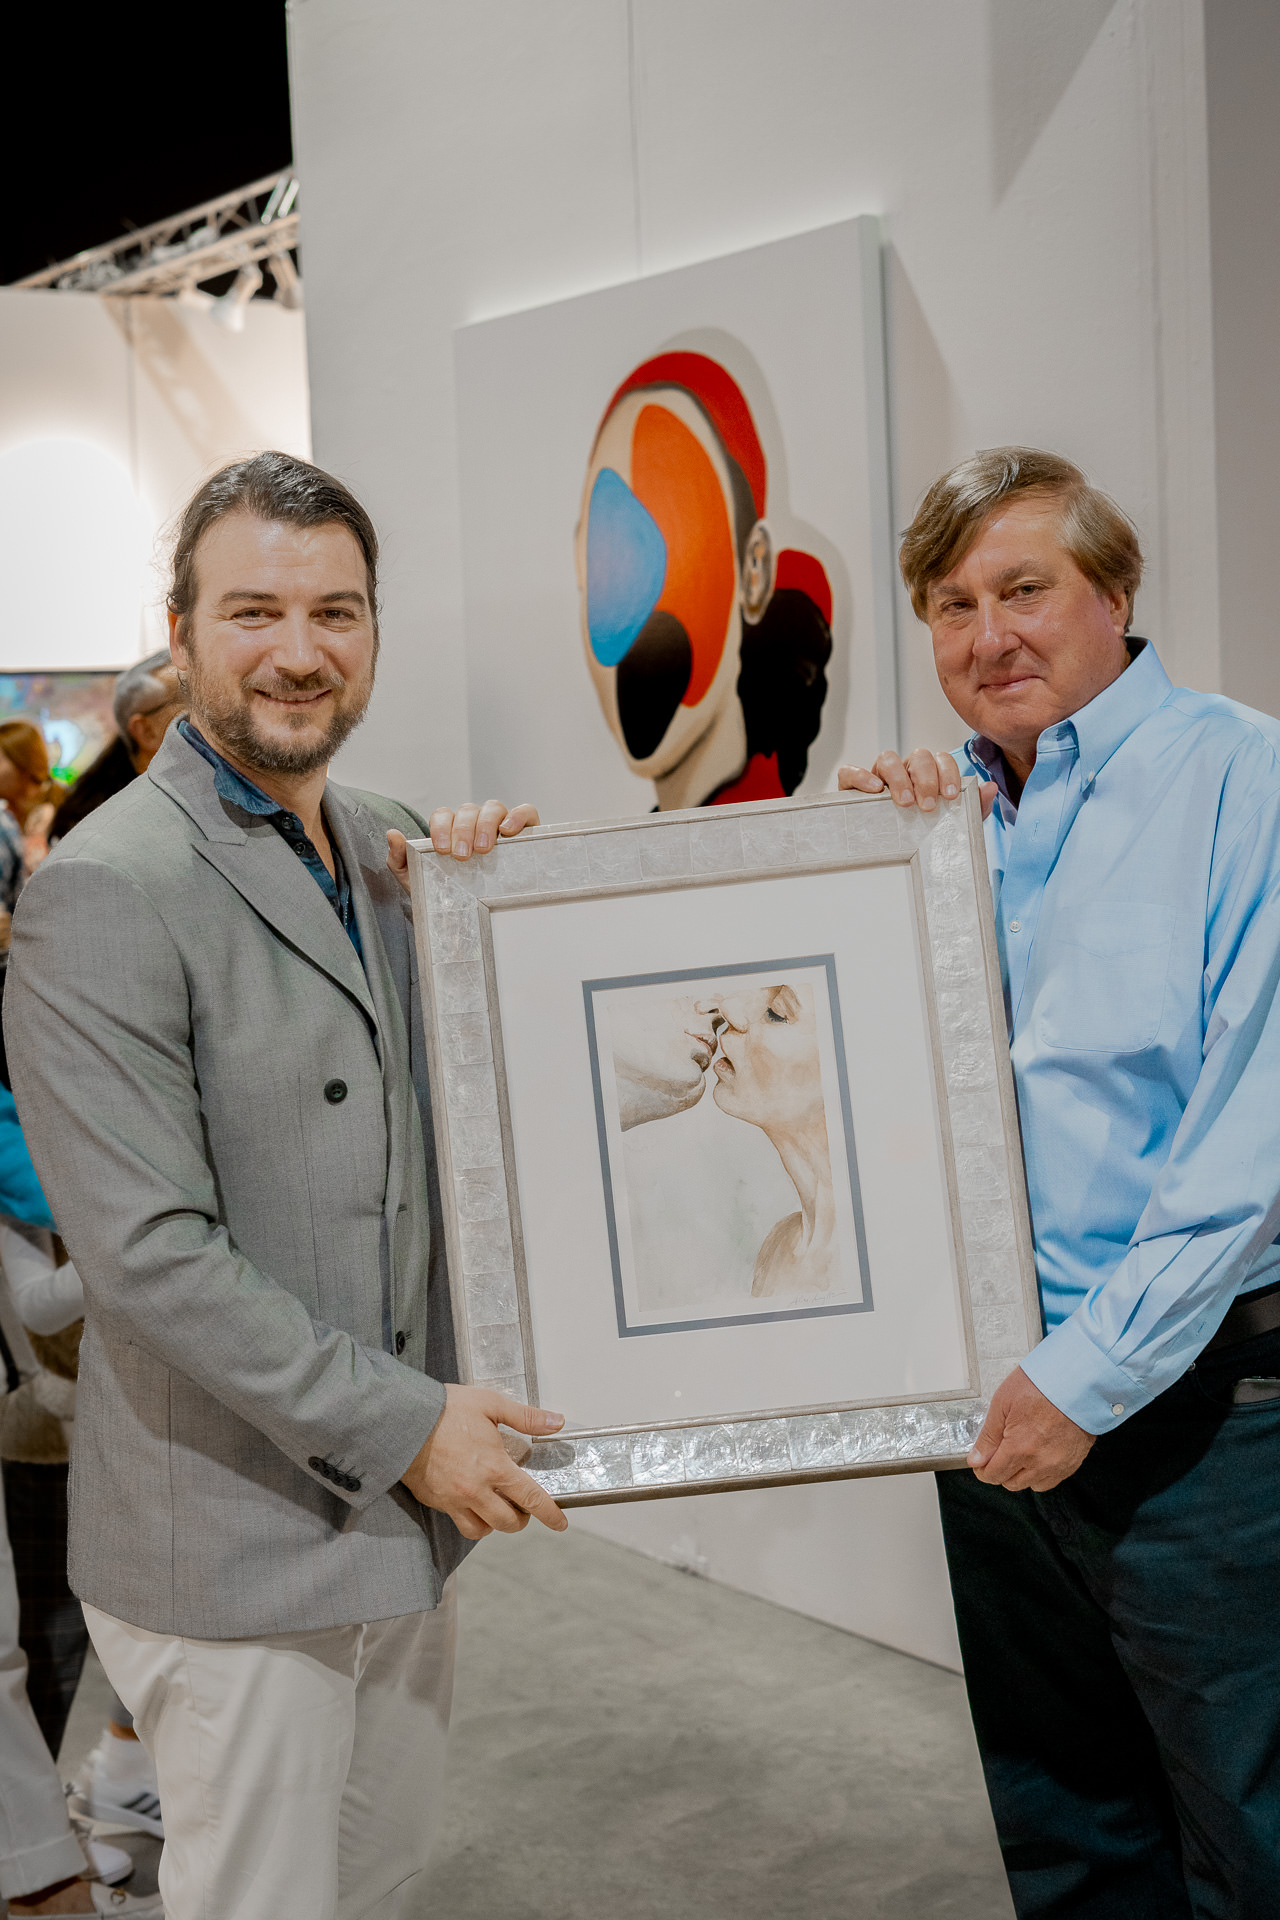 Artist Alex Righetto on the left, presenting the framed painting 'The Kiss' to Nicholas Gravante on the right, at Spectrum Miami 2023.